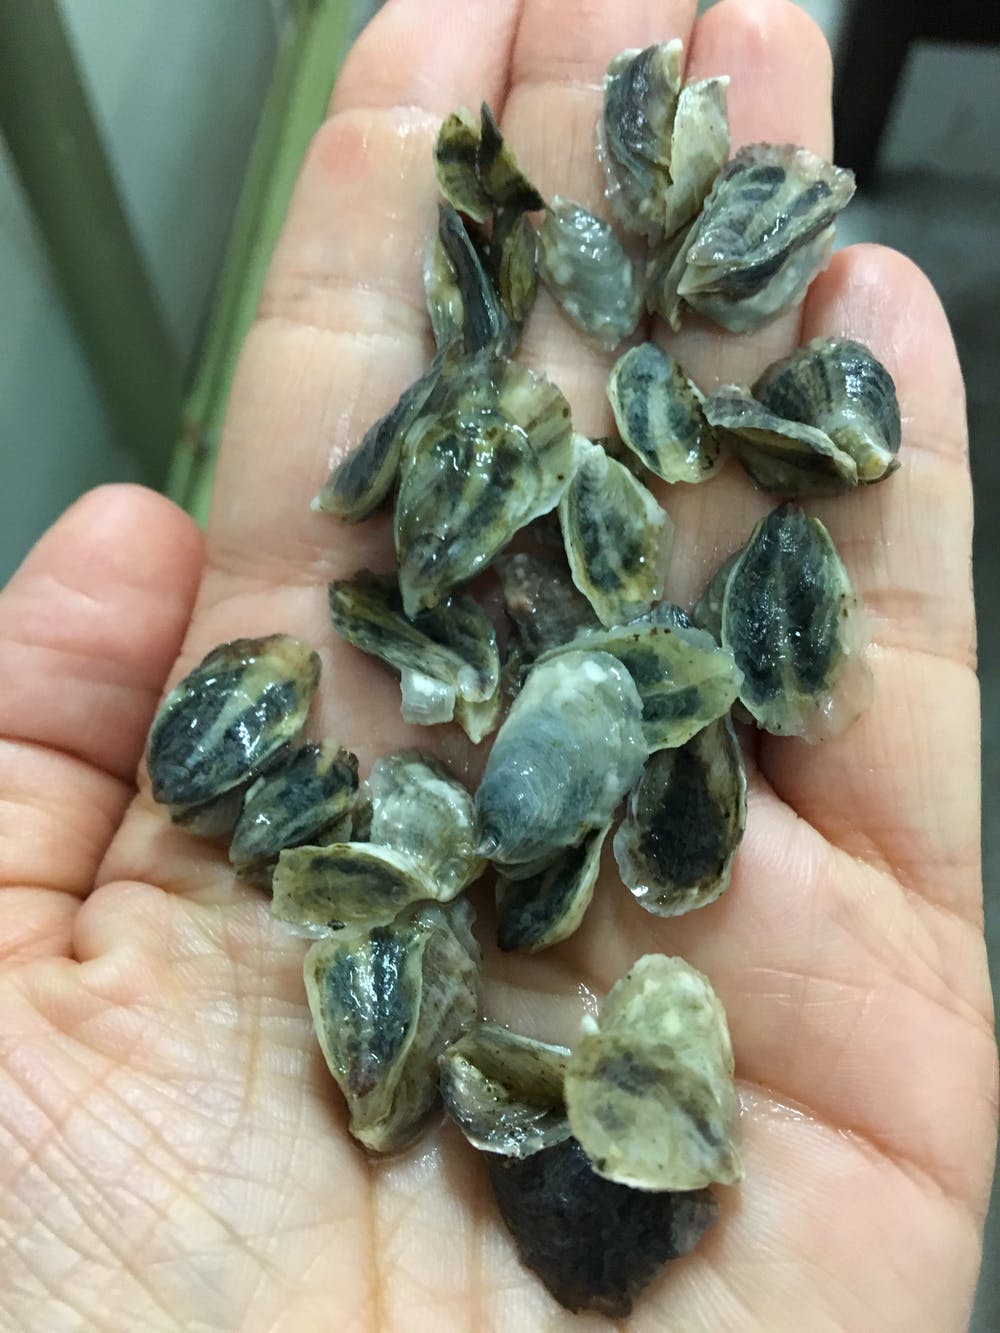 Pacific oyster seeds ready for planting